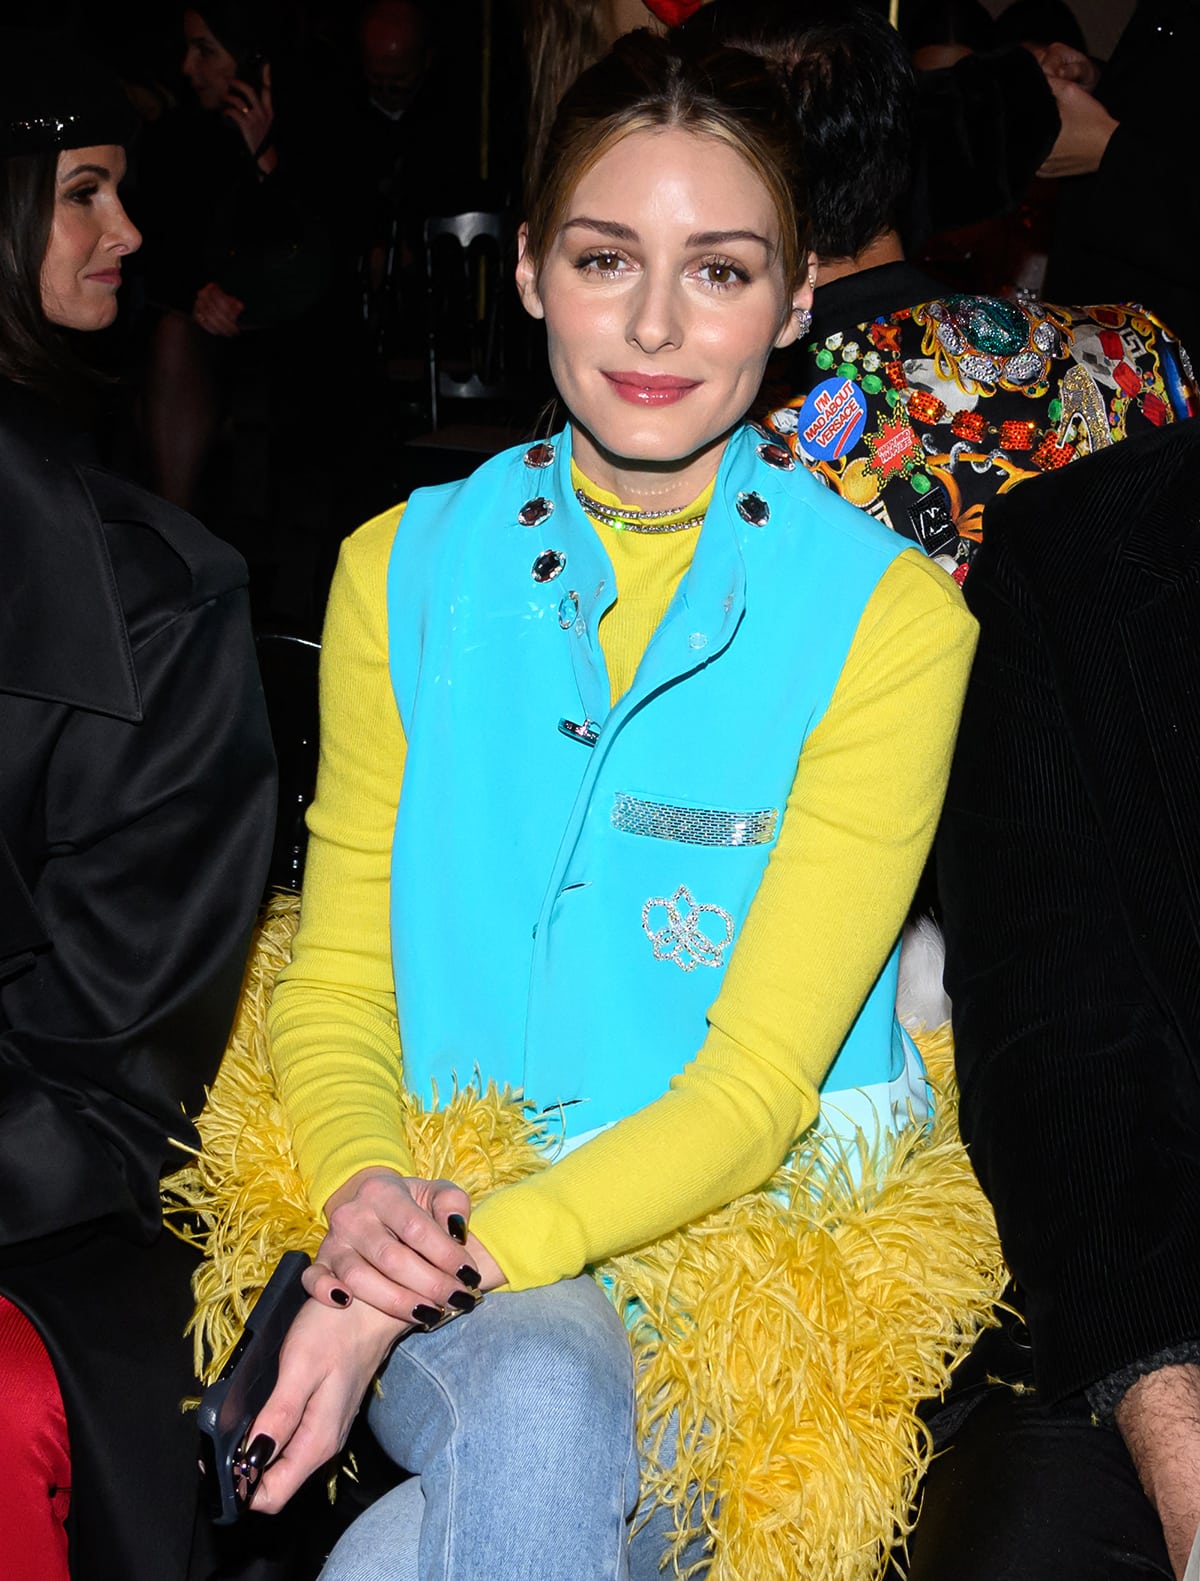 Olivia Palermo teams Georges Hobeika's yellow feather-trimmed turquoise vest with a yellow sweater and casual jeans